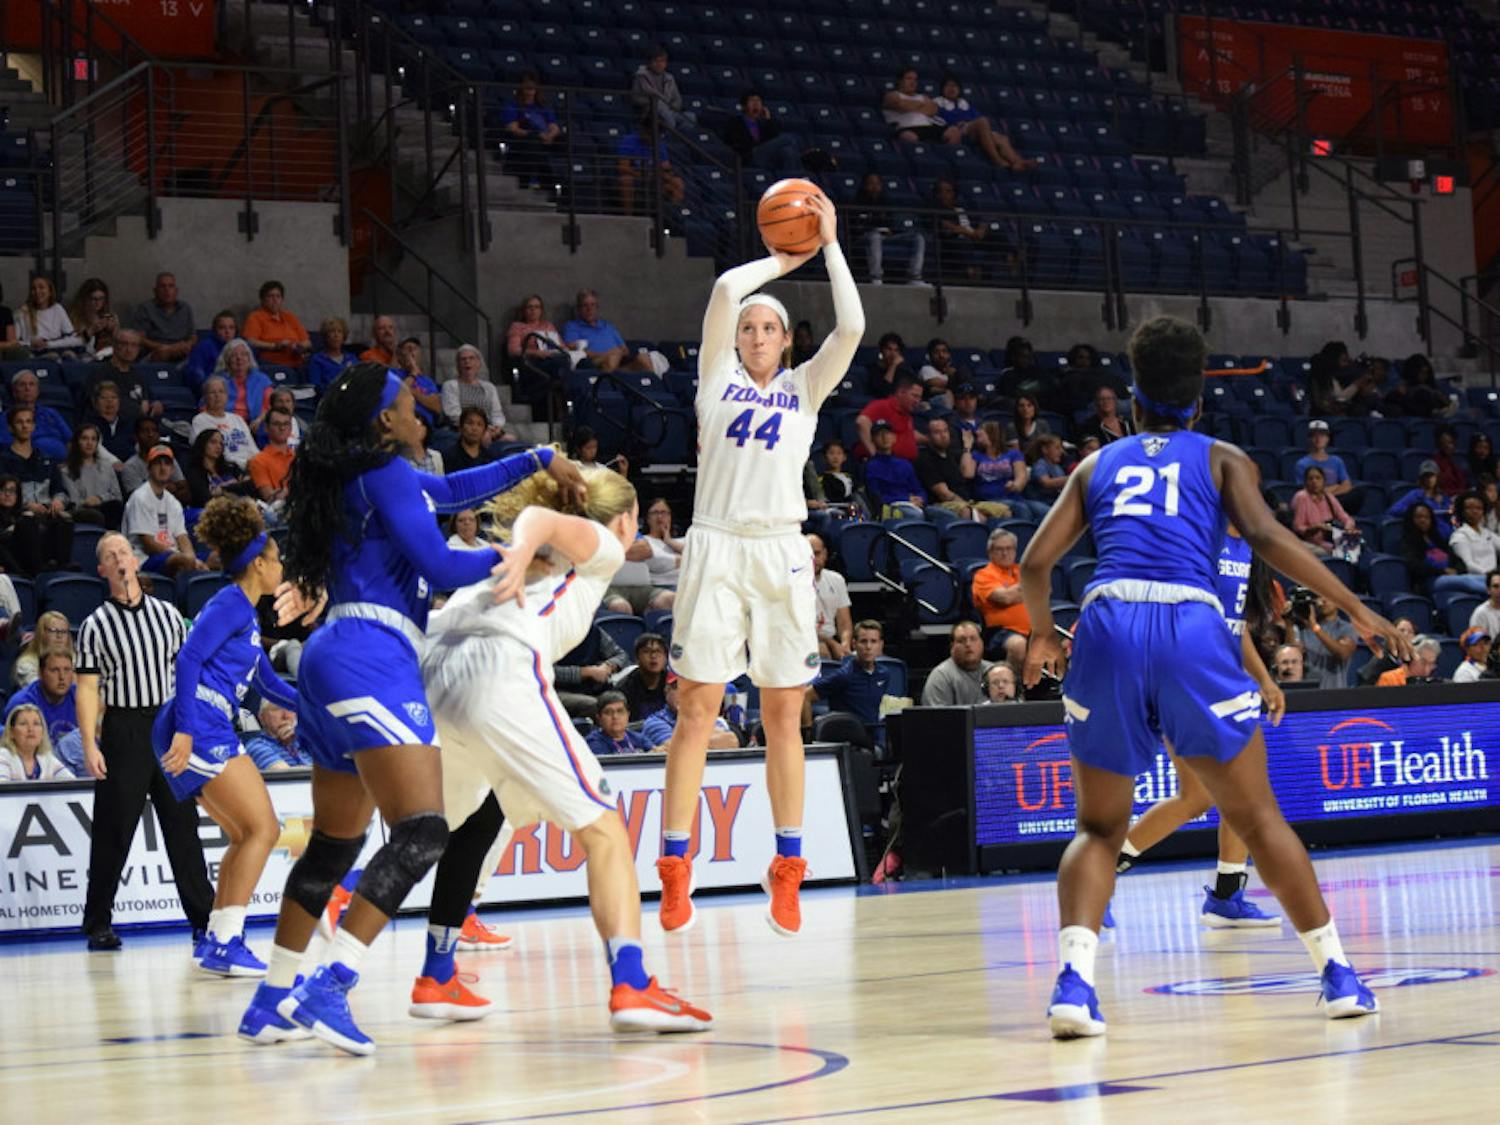 Haley Lorenzen matched a season high with 20 points and added 10 rebounds against LSU &nbsp;in a 66-59 loss&nbsp;on Sunday.&nbsp;“We let our mistakes kind of dictate what we were trying to do,” Lorenzen said.